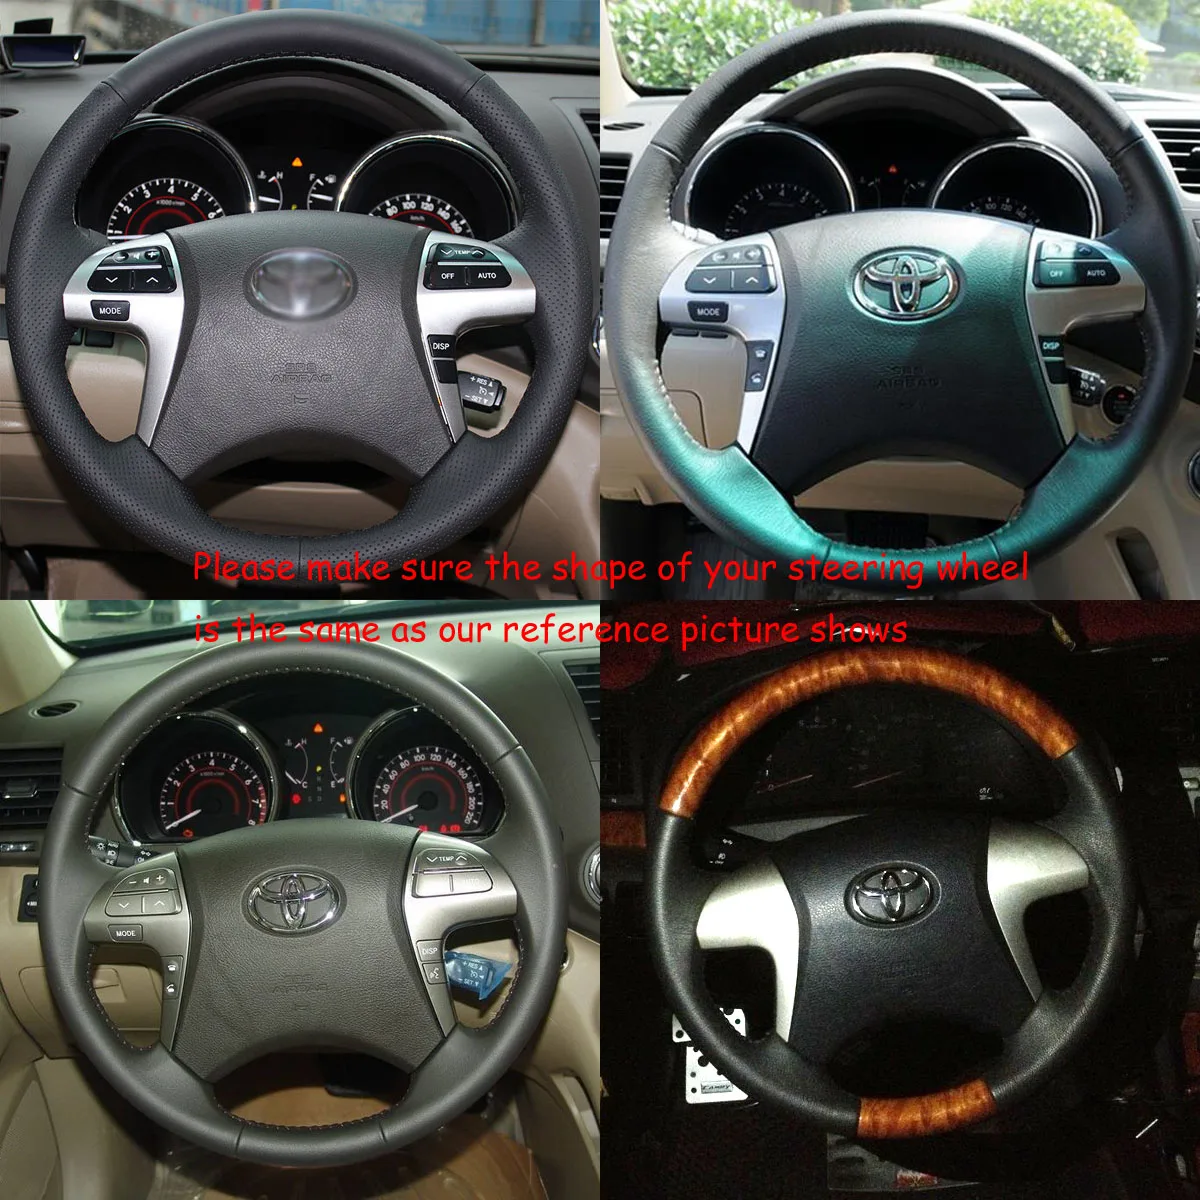 Us 196 0 Leather Wood Sports Steering Wheel For 2007 2011 Toyota Camry Highlander Kluger Estima Hilux Fortuner Allion Corolla Axi In Steering Wheels